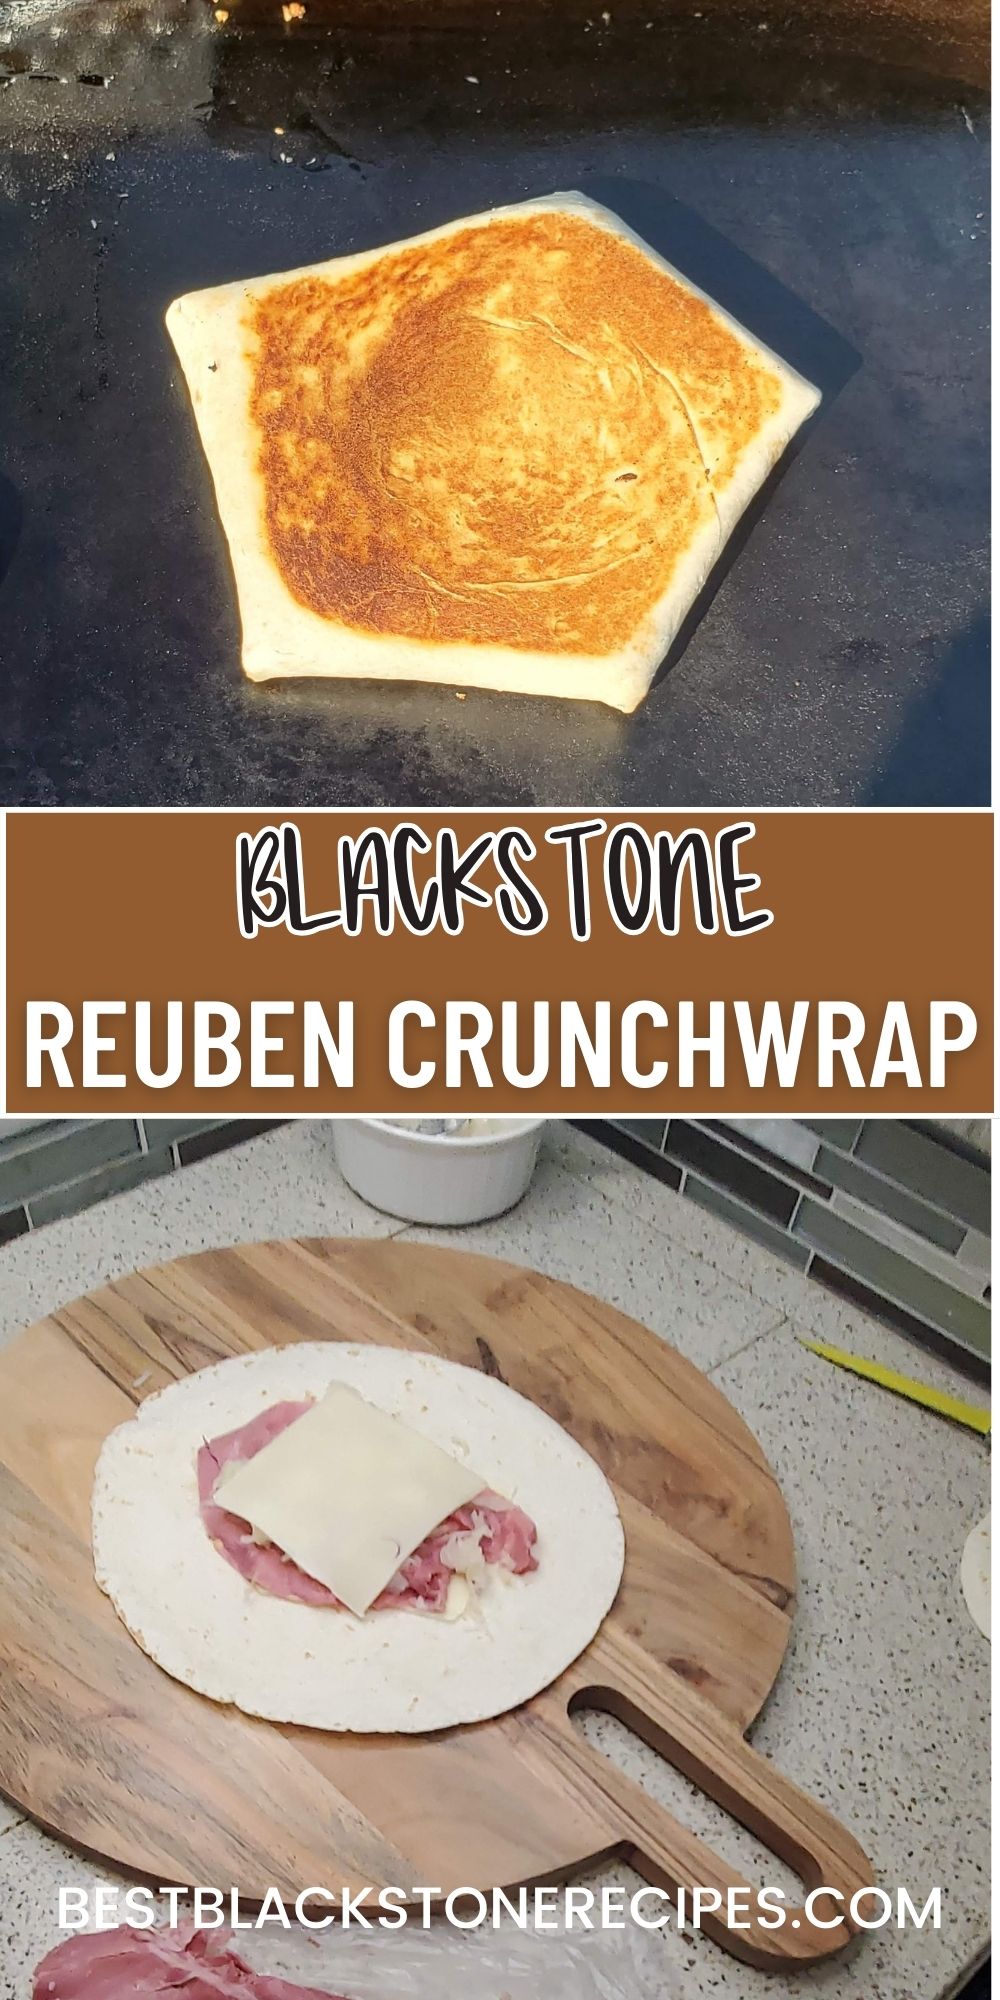 Preparation of a reuben crunchwrap on a griddle with a completed wrap on top and ingredients being added on a wooden cutting board below.